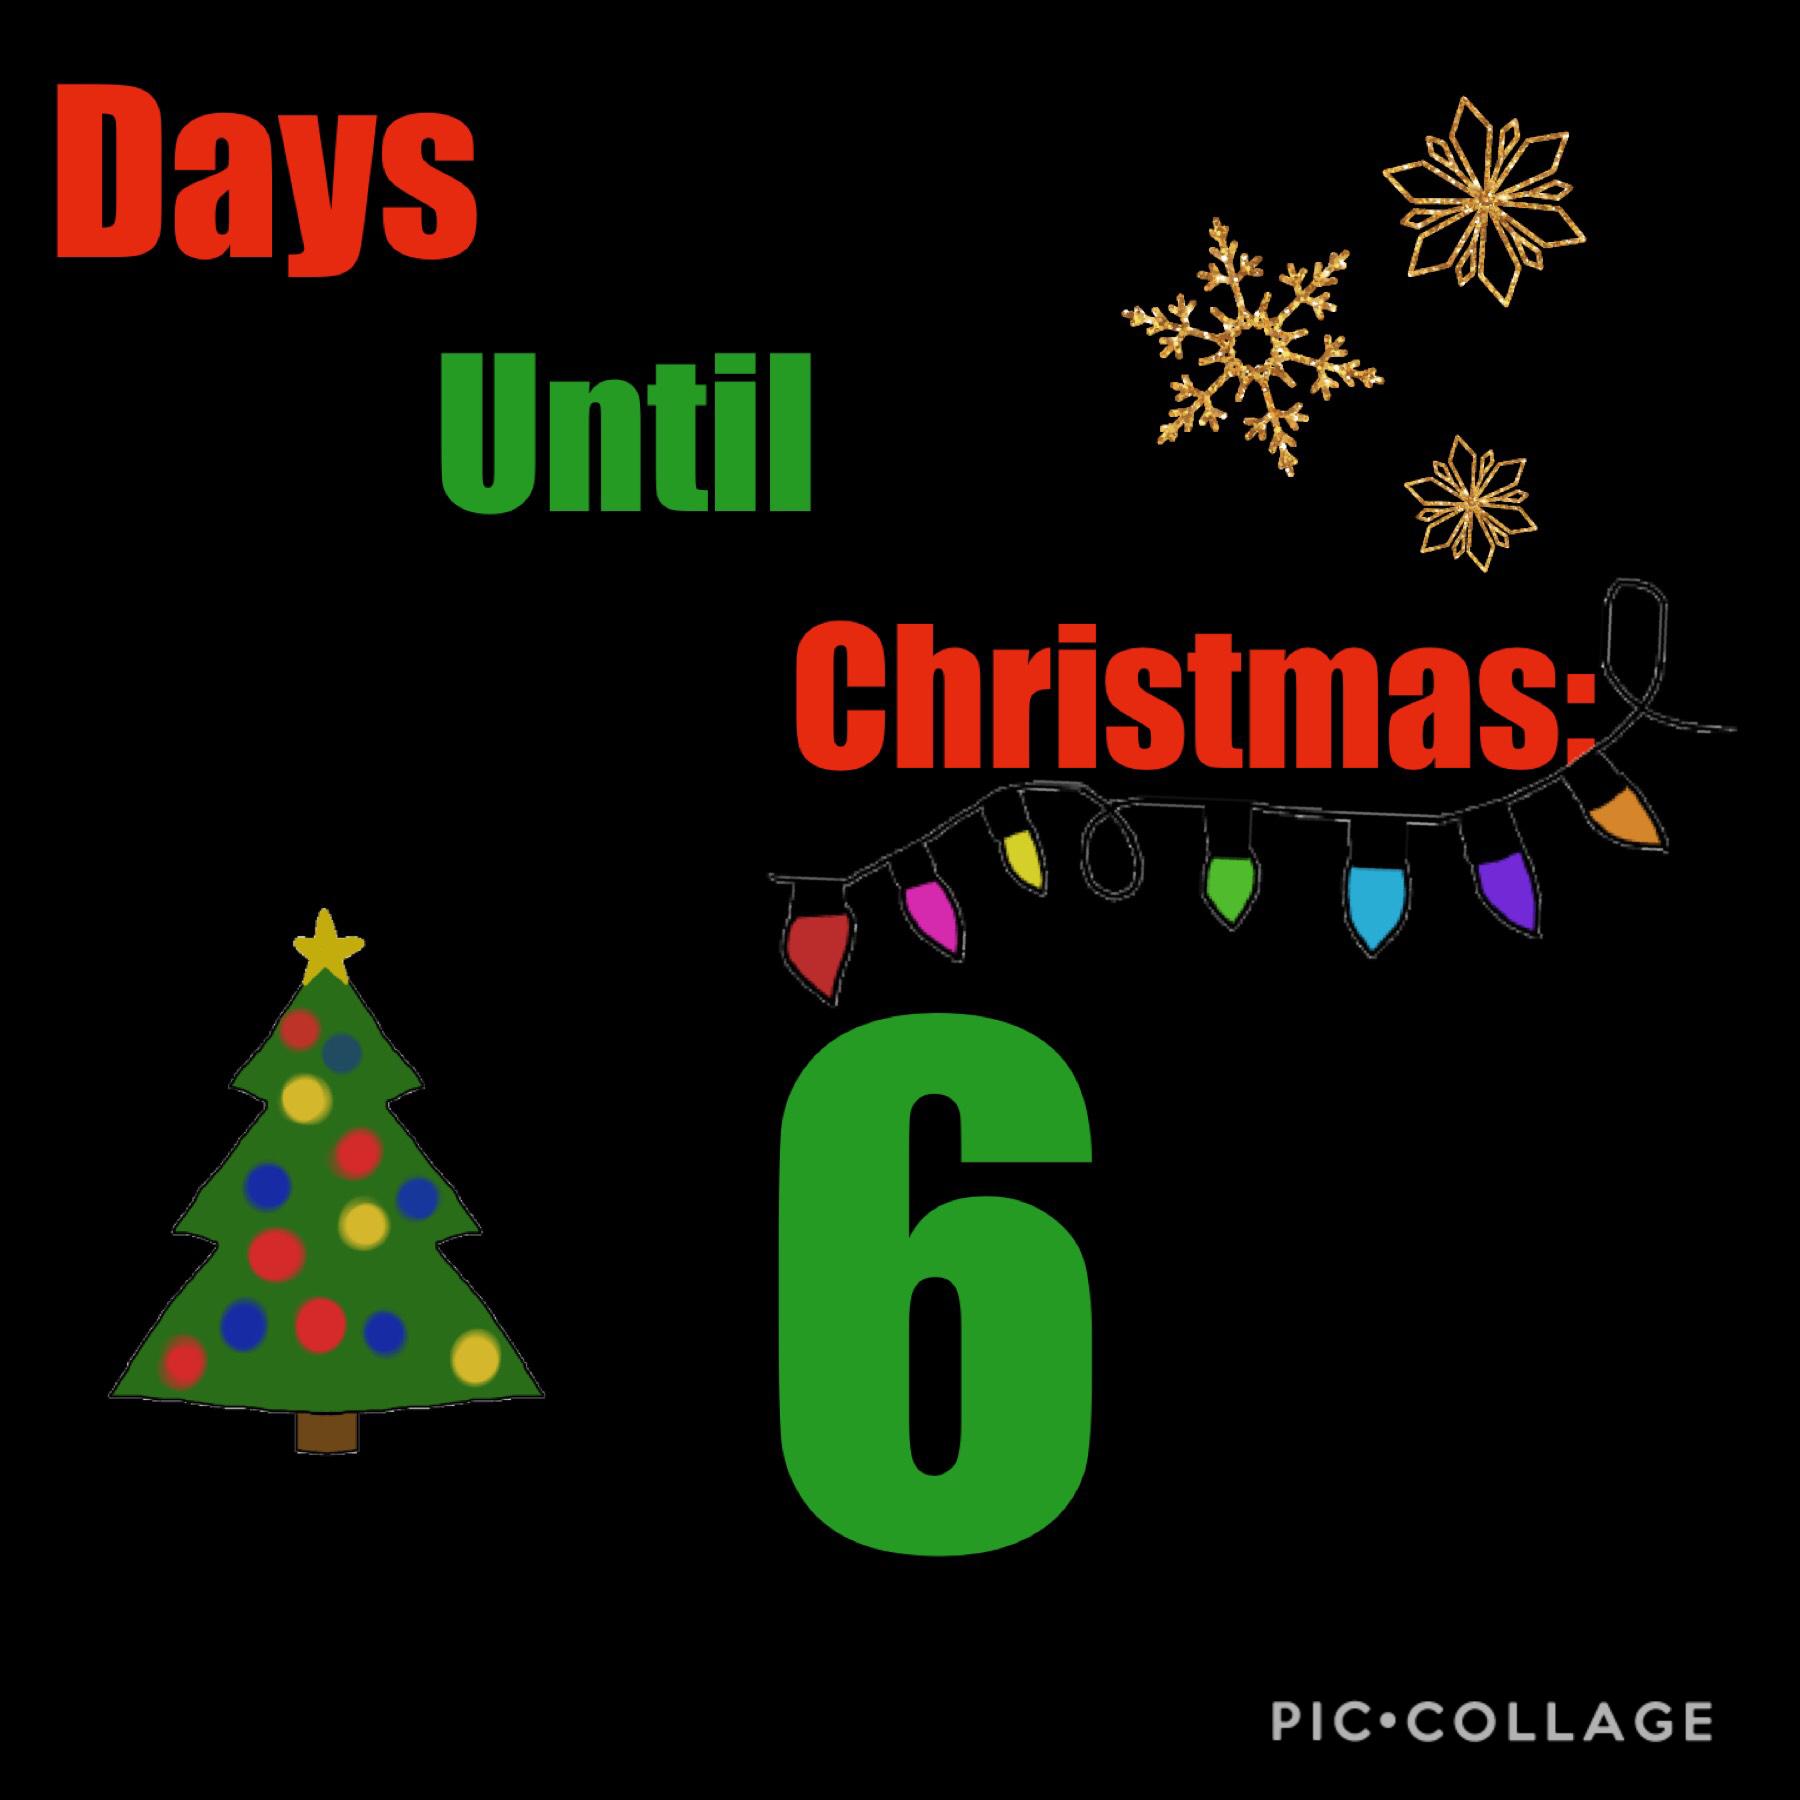 Only 6 more days!!!!